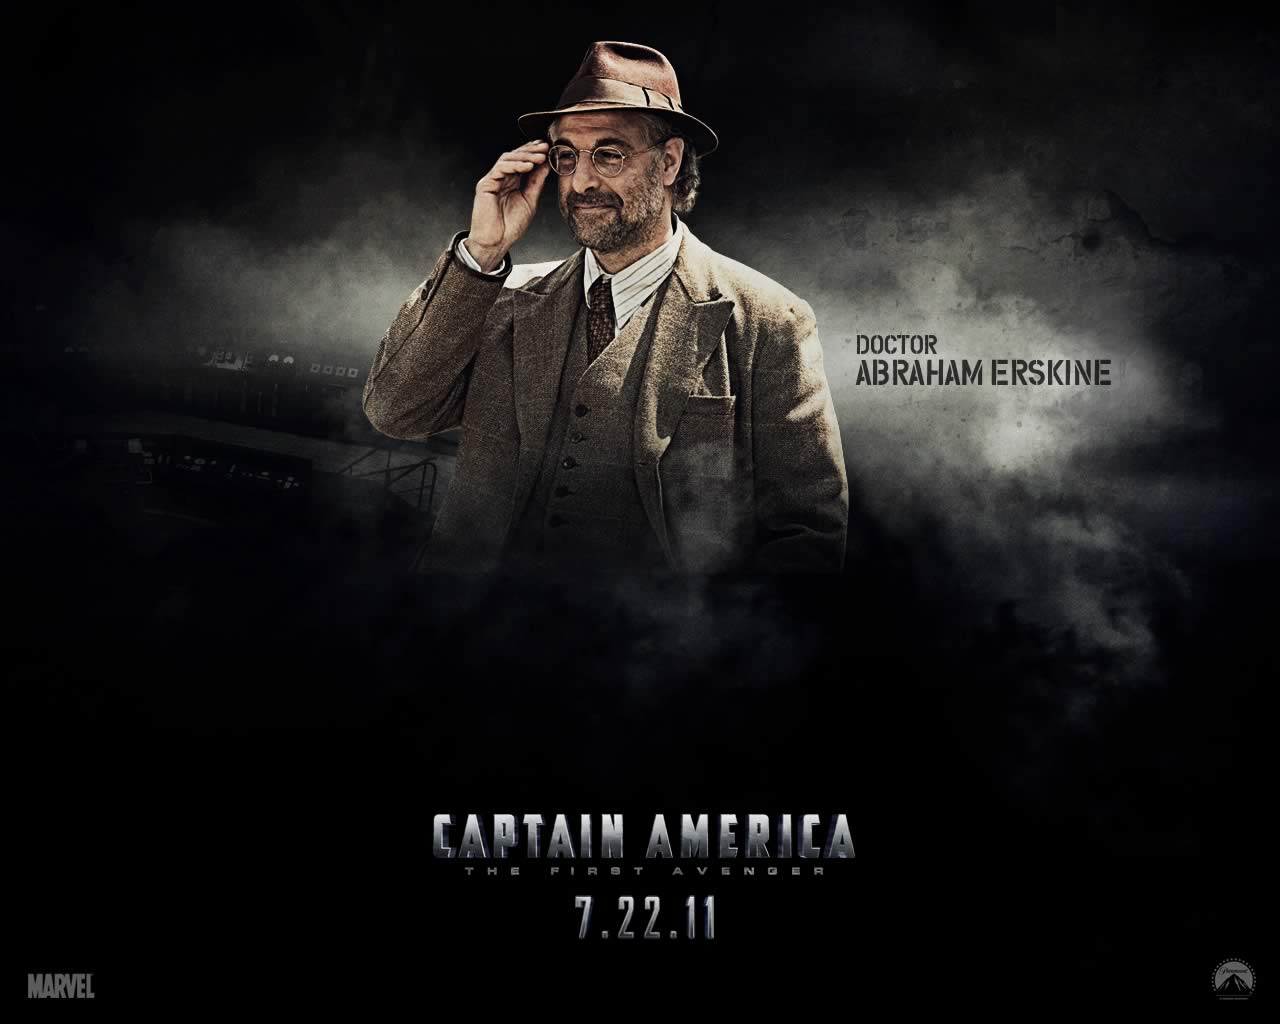 Captain America: The First Avenger / Stanley Tucci as Dr. Abraham